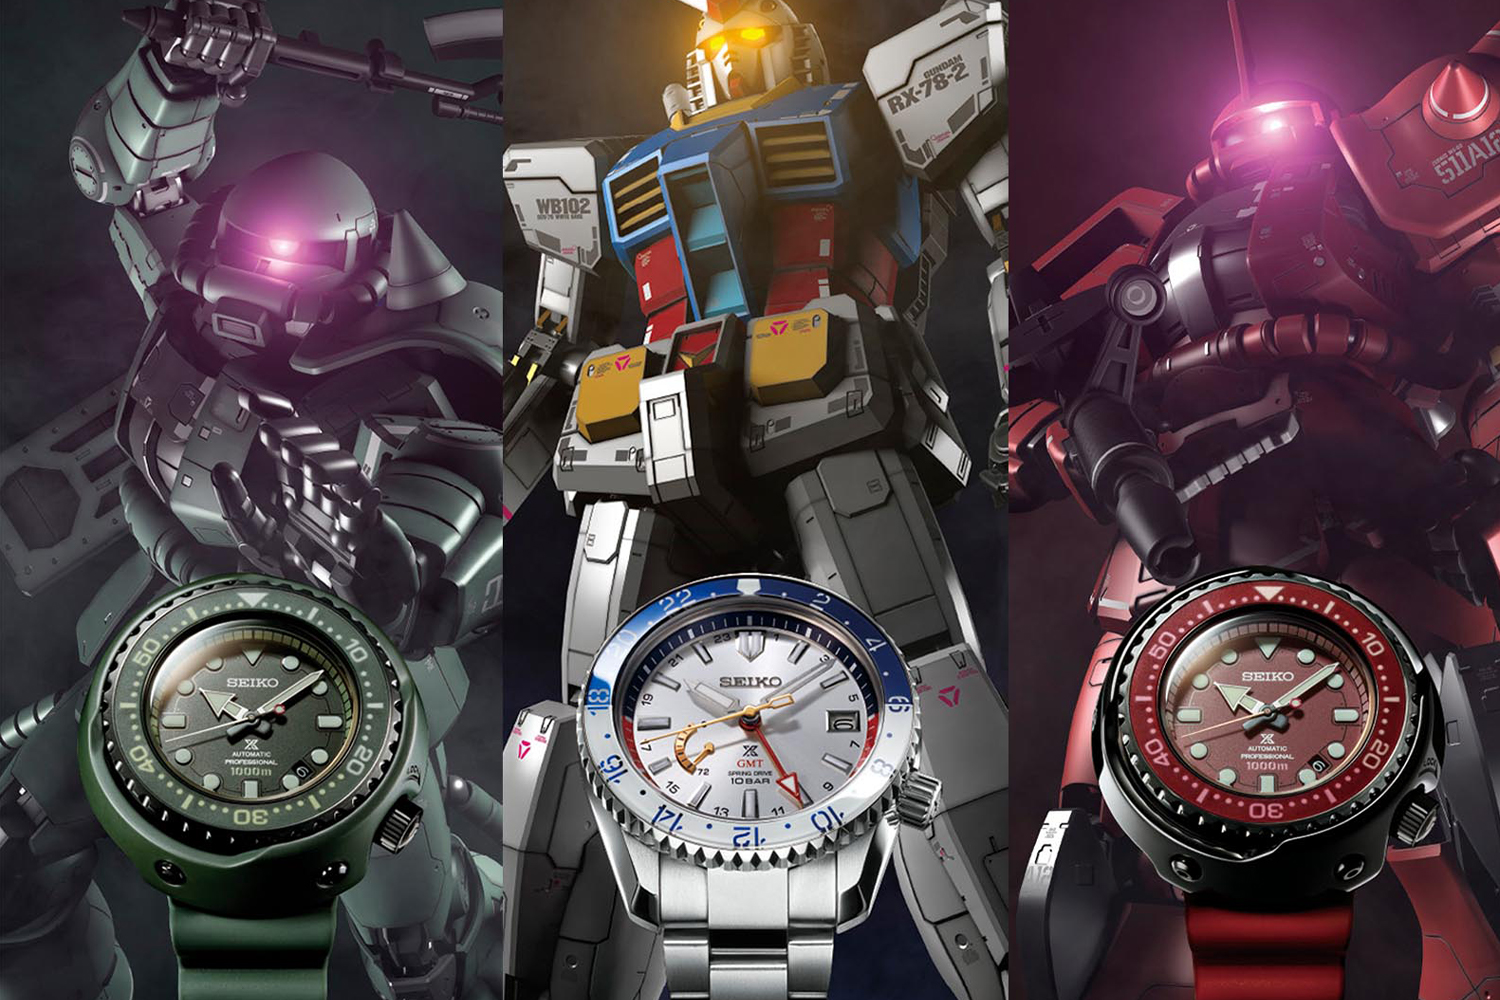 Seiko's Cultish Anime Collabs Are Gaining a Global Following - InsideHook